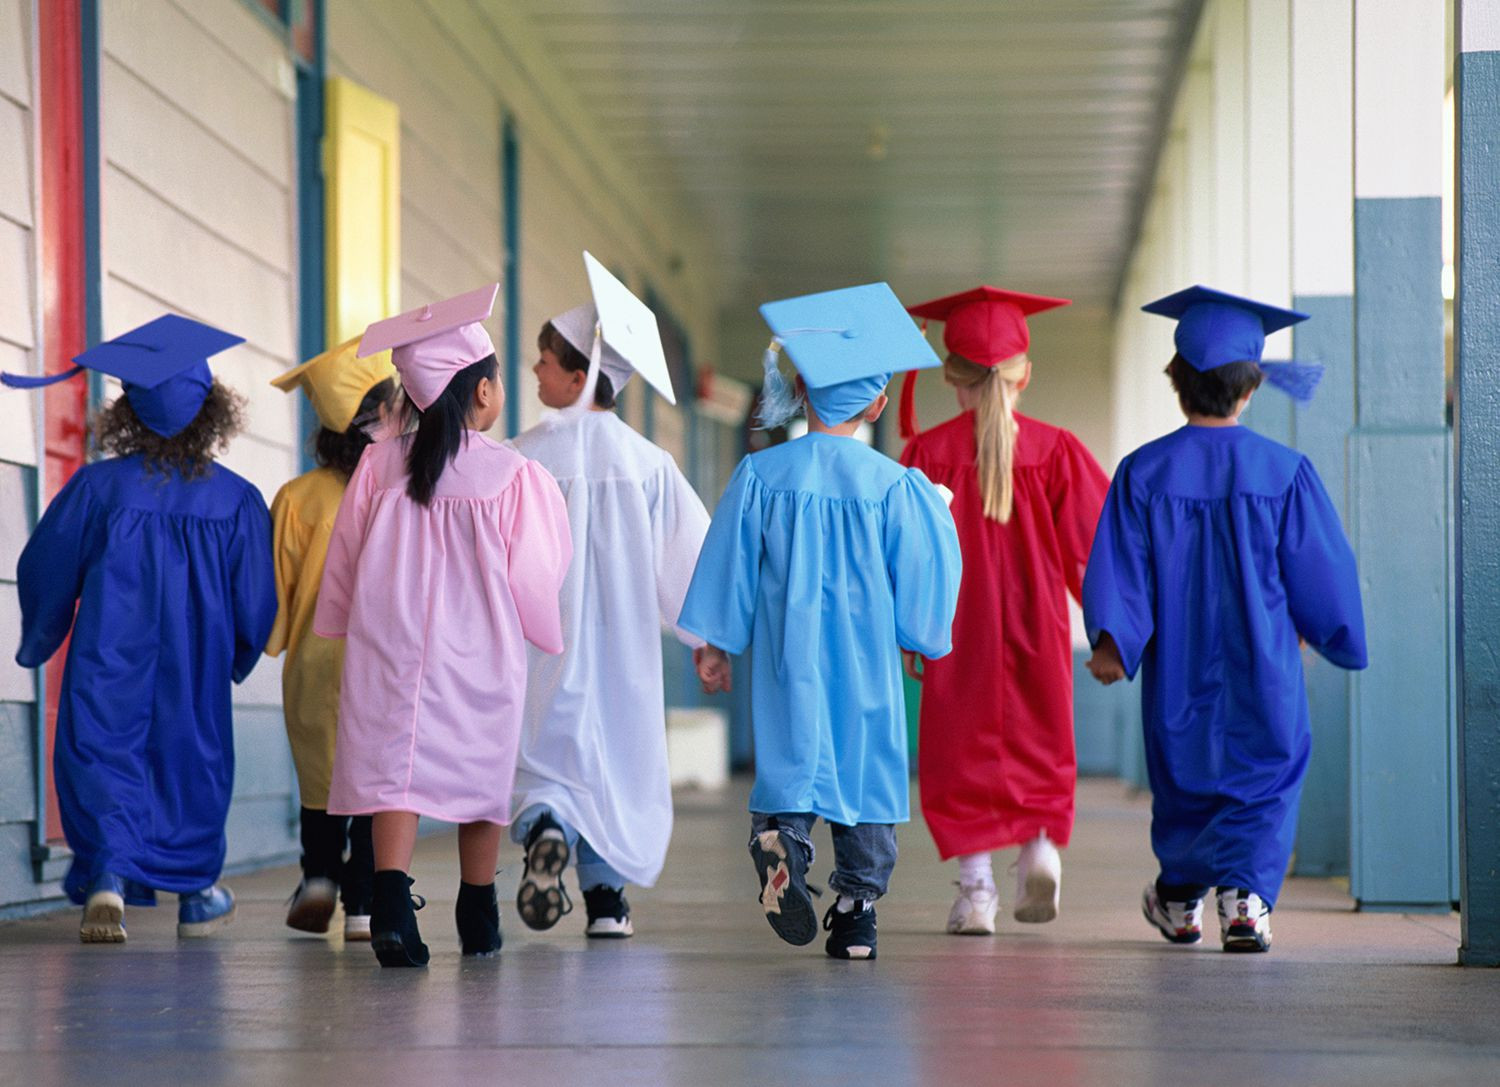 Elementary Graduation Party Ideas
 The Best Elementary School Graduation Gifts for Kids